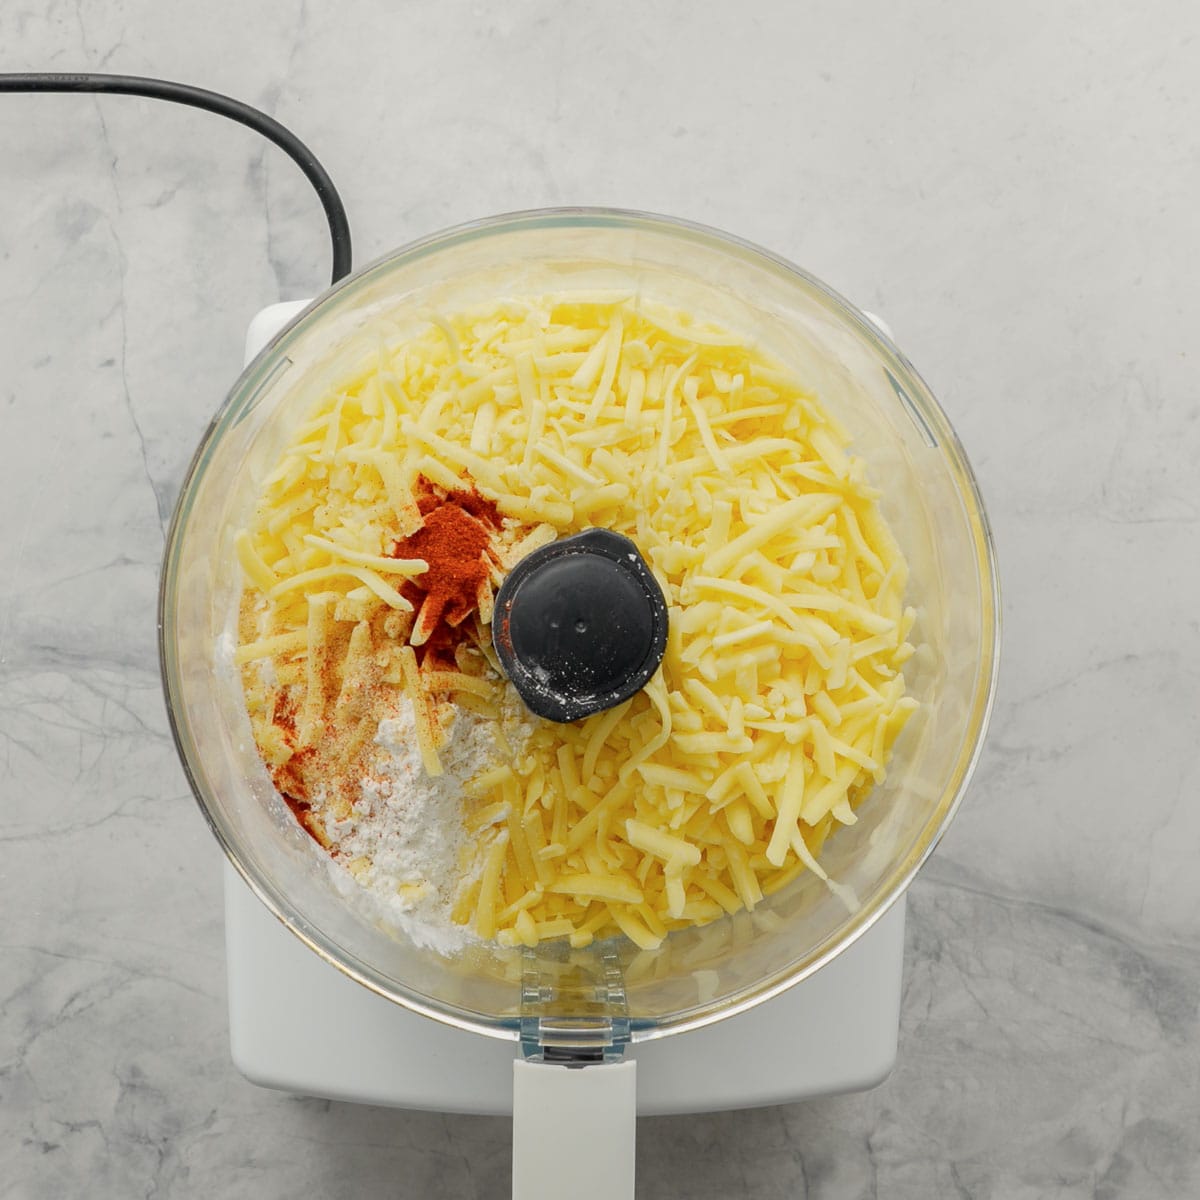 A food processor sitting on the bench with cheese, gluten free flour and seasoning inside it.